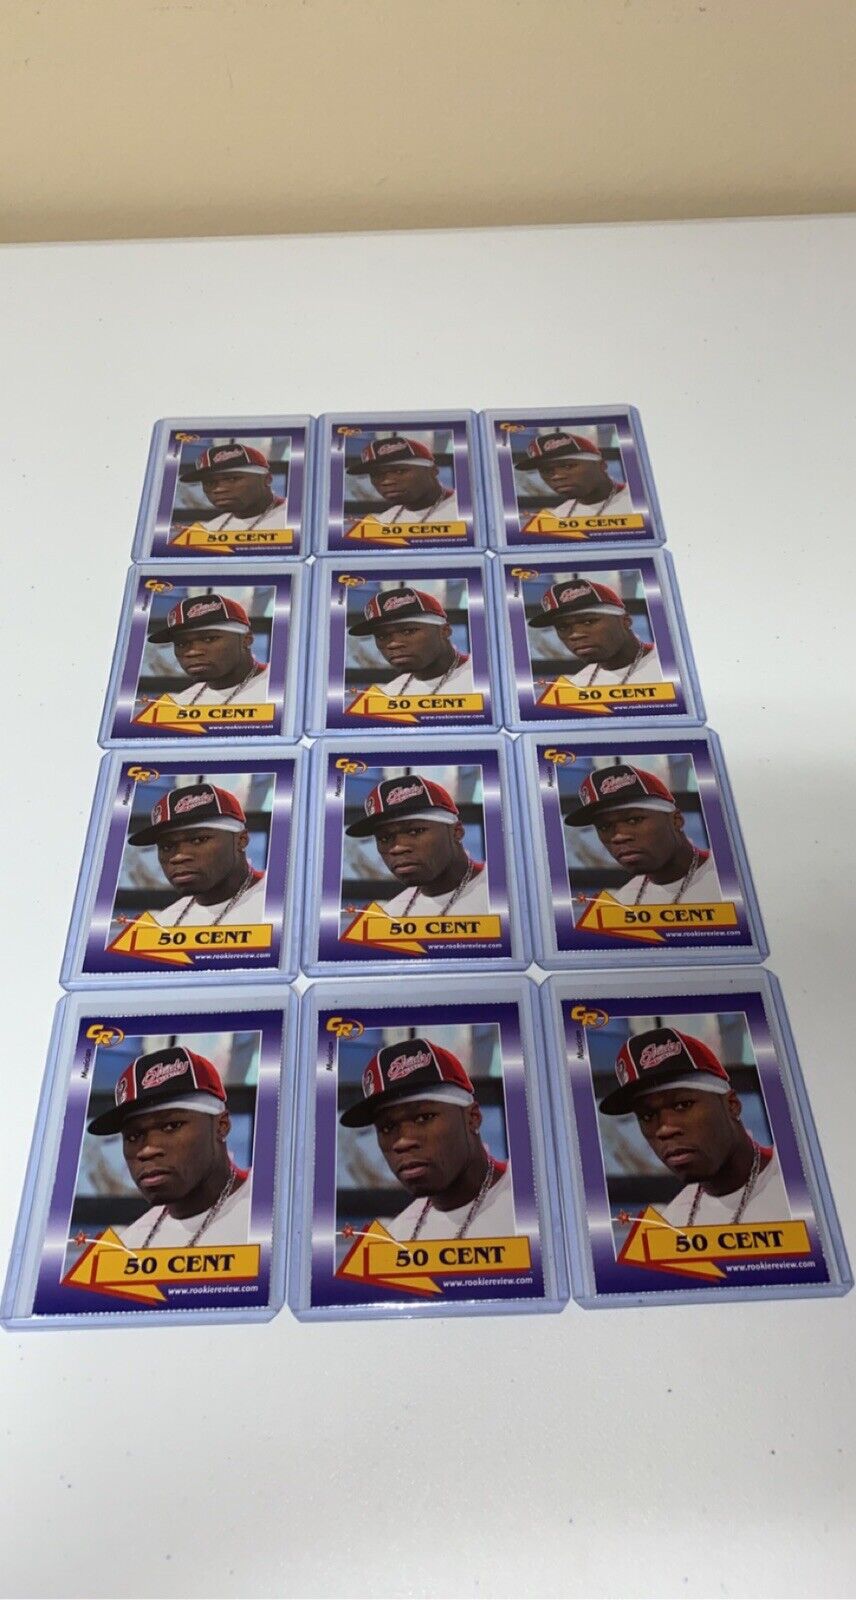 2003 Celebrity Review Rookie Review 50 CENT Rapper Musician Card #10 